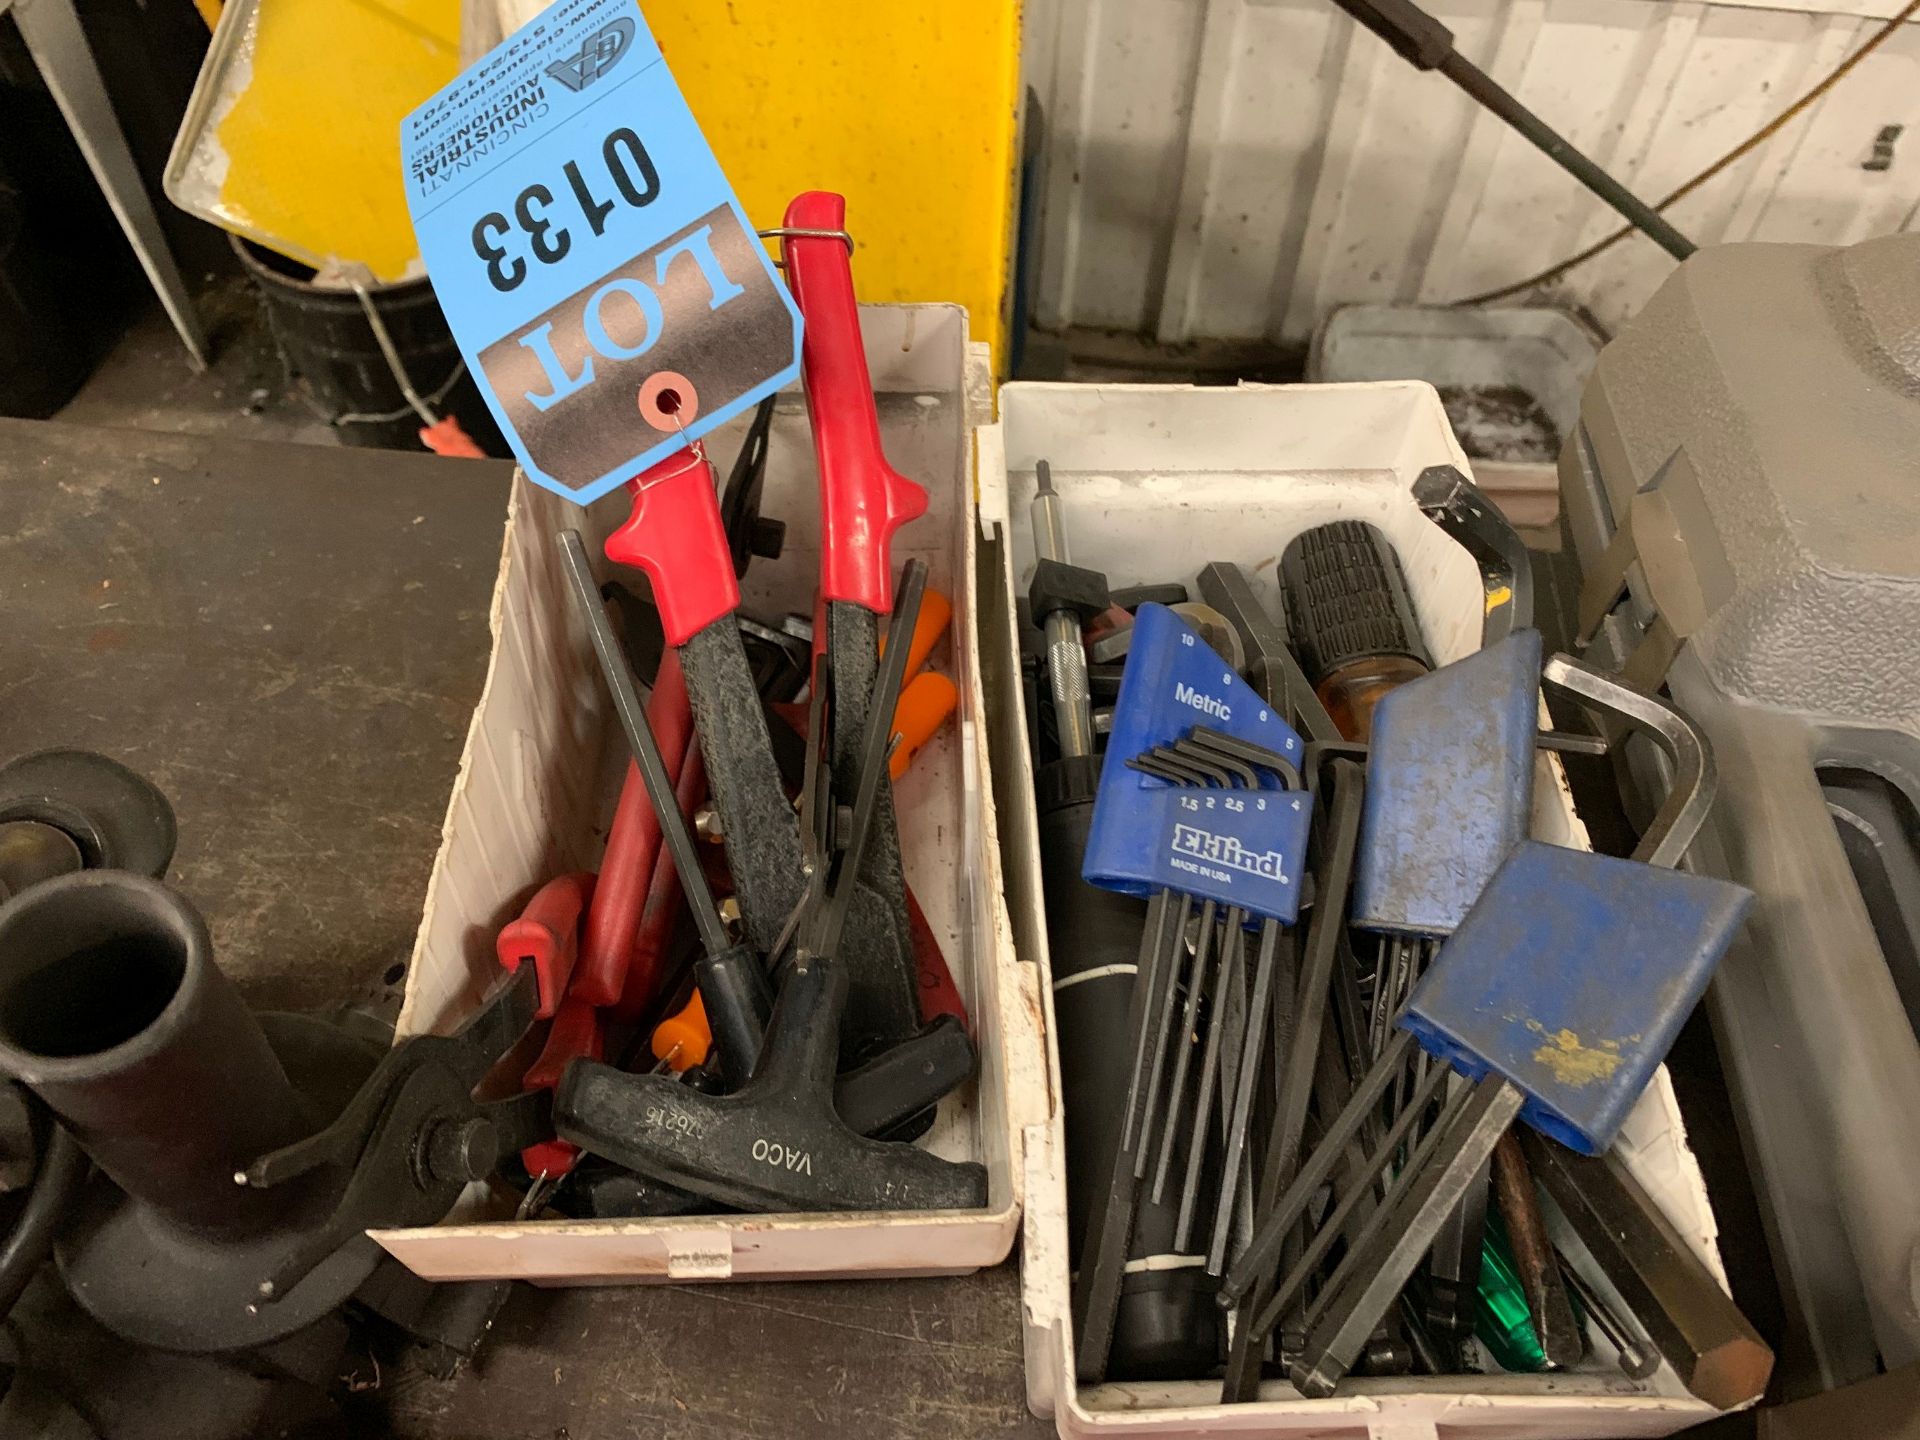 (LOT) MISC. HAND TOOLS INCLUDING ALLEN WRENCHES, SCREWDRIVERS